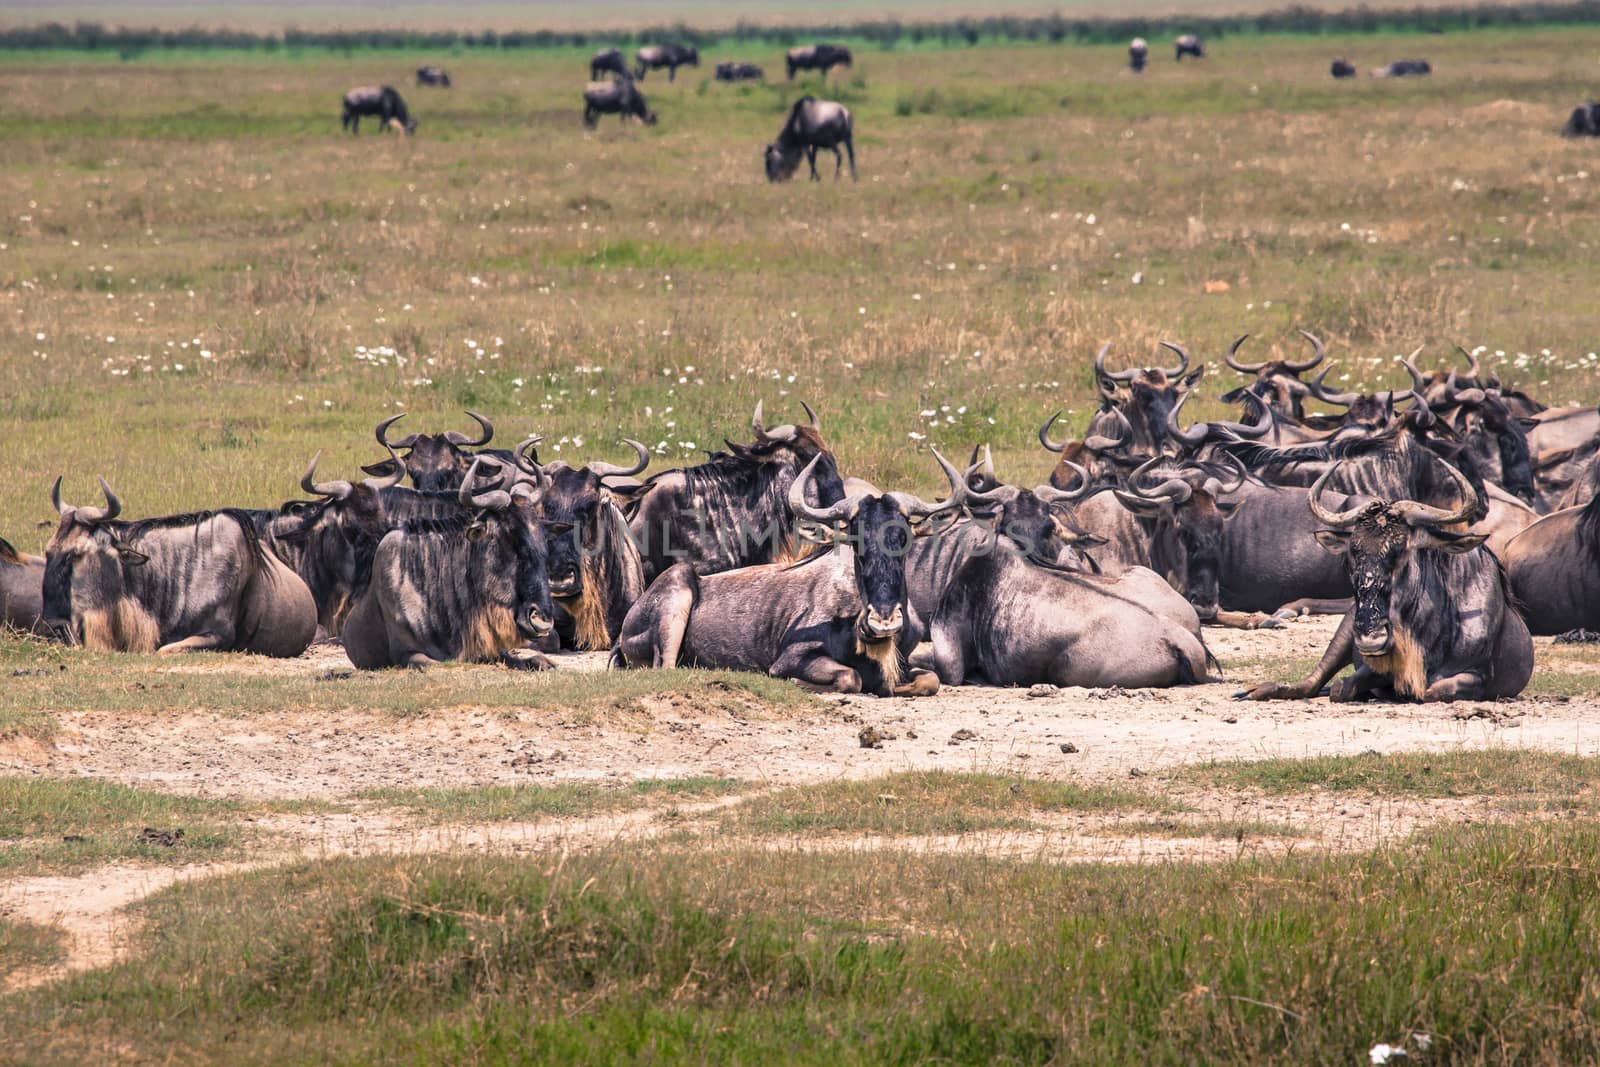 A Wildebeest mother and newly born calf, Ngorongoro Crater, Tanzania.